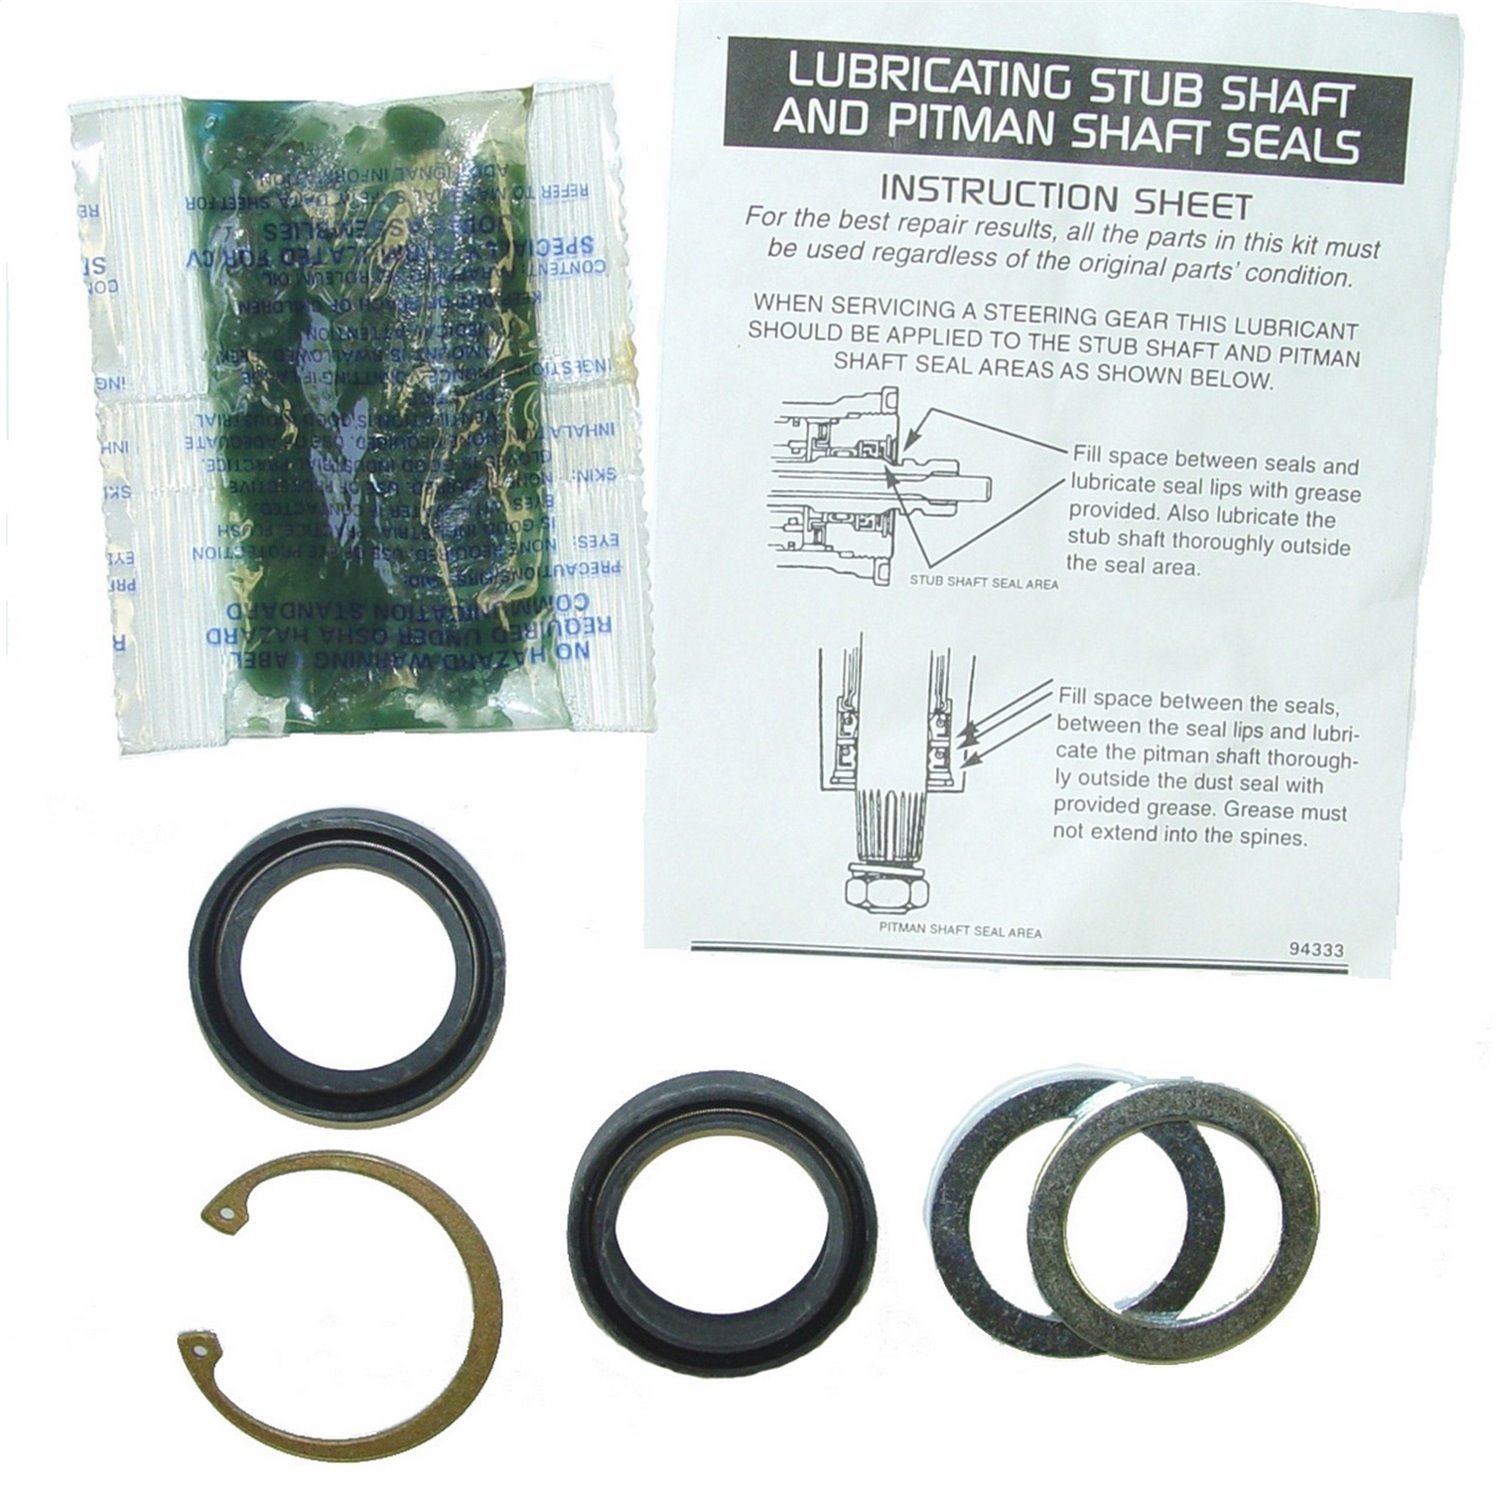 This lower power steering seal kit from Omix-ADA fits all 93-98 Jeep Grand Cherokees and 87-95 Wrang